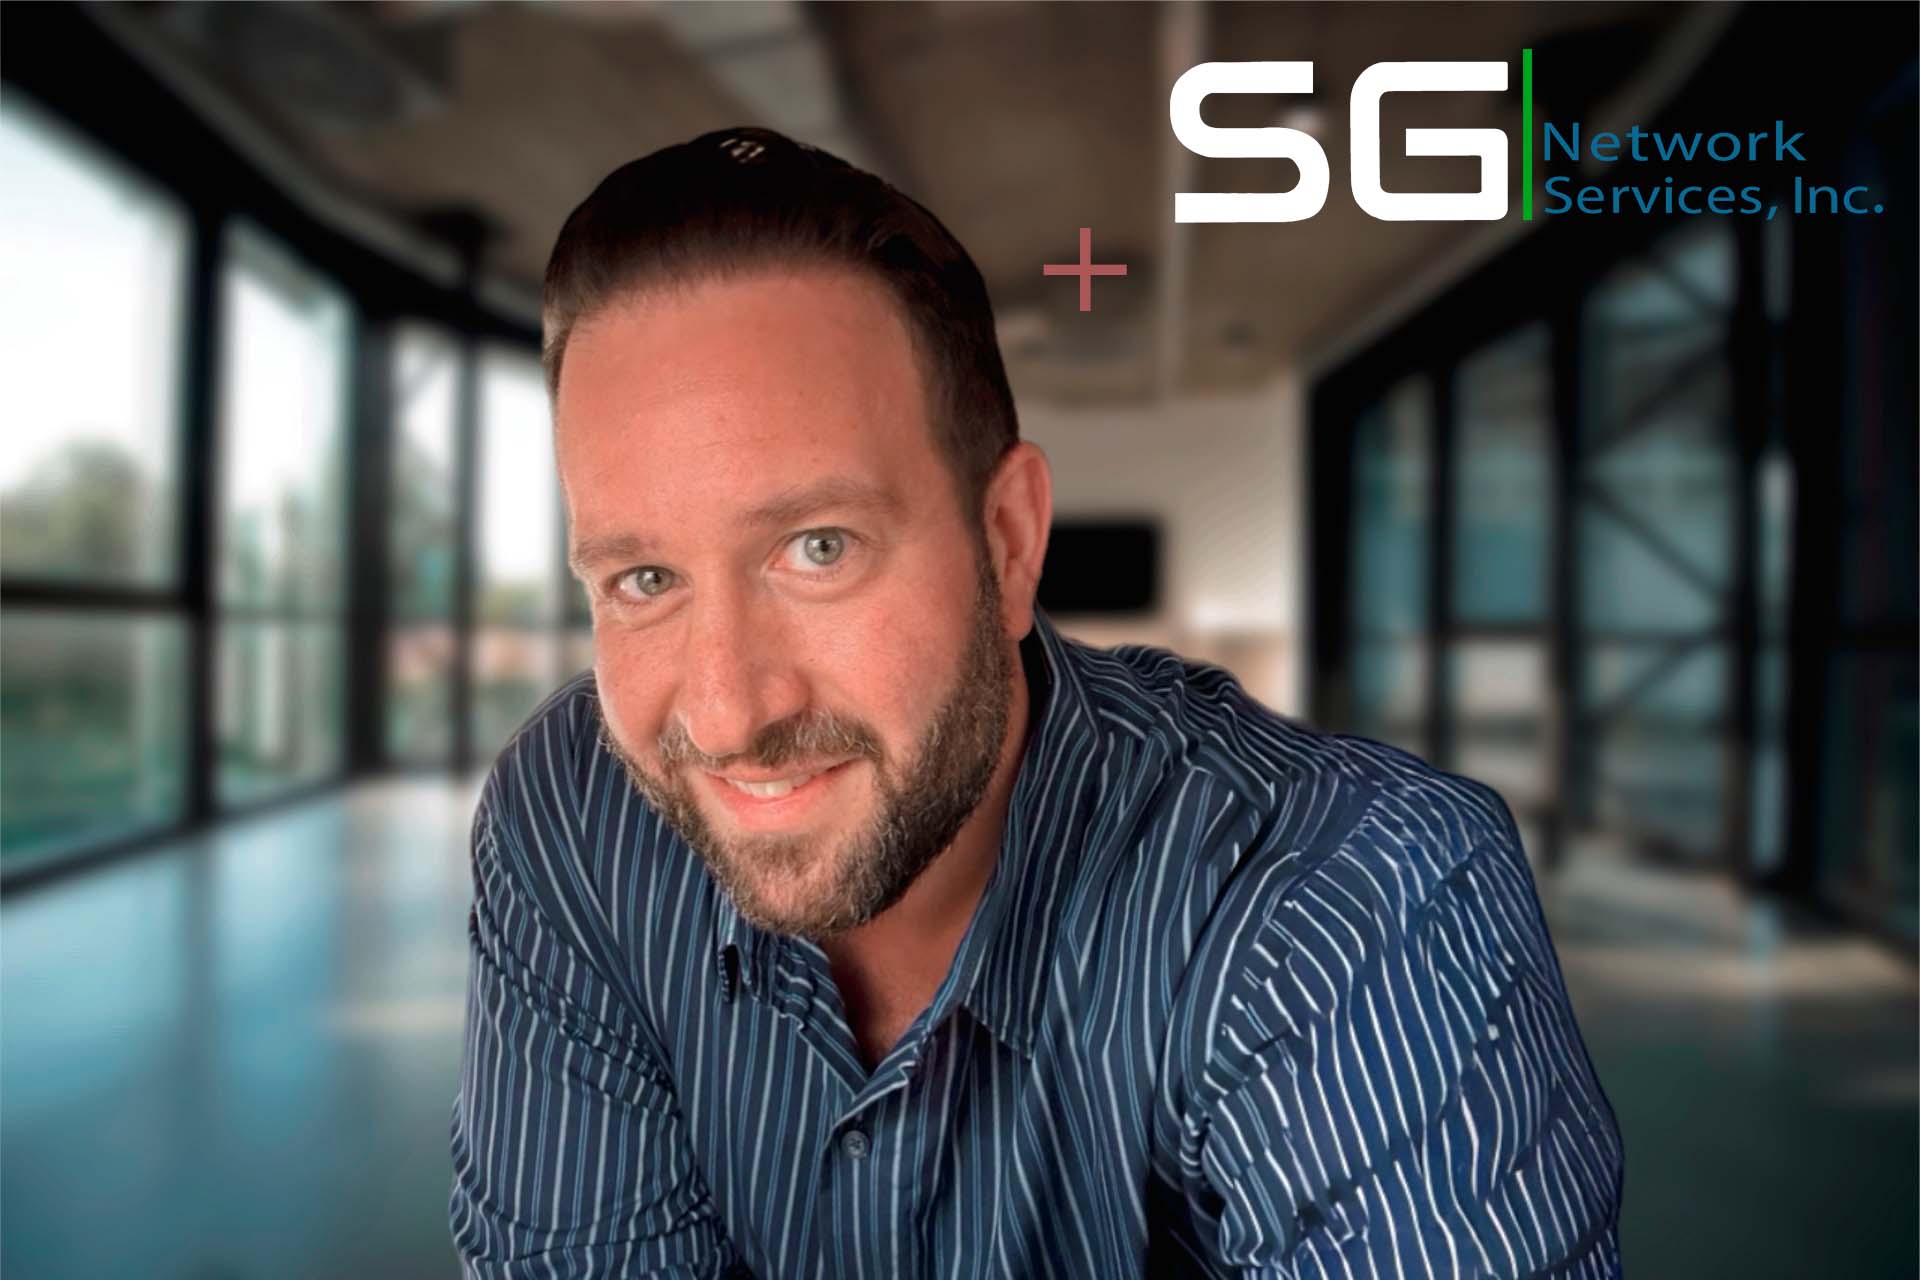 SG Network Services Welcomes Tom Roberto as Chief Technology Officer